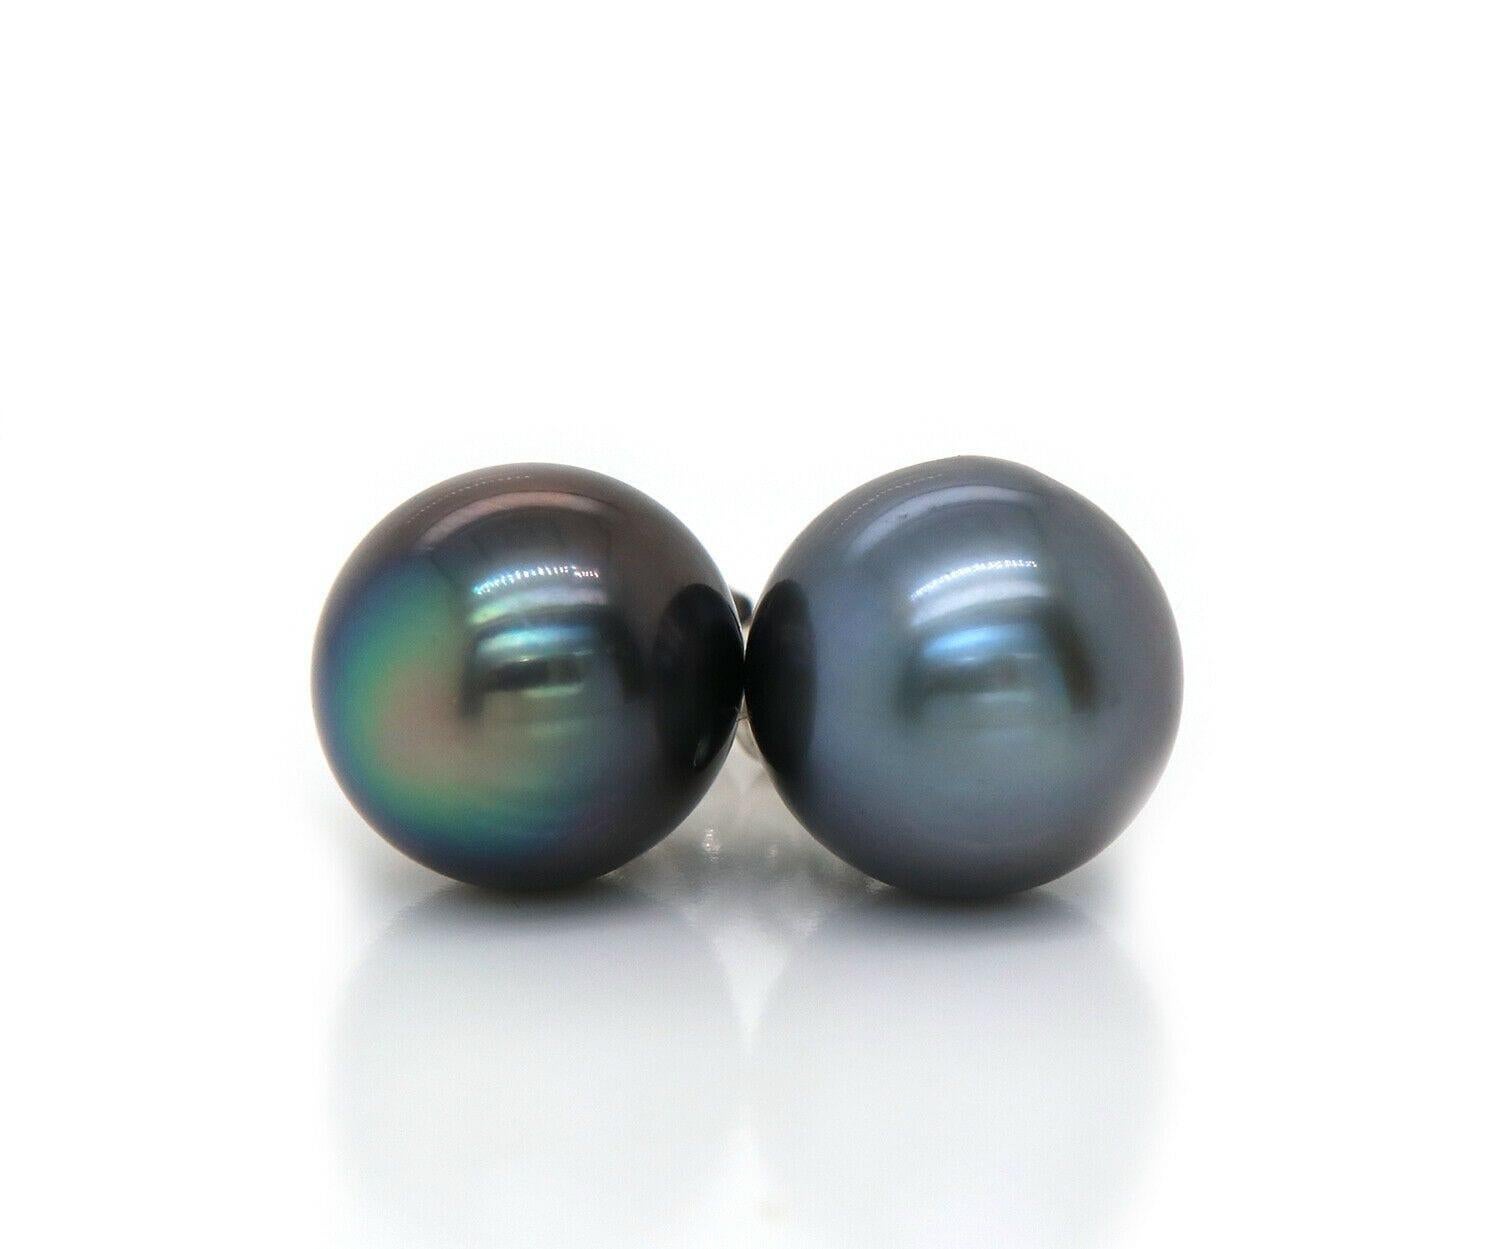 11.5 MM Tahitian Cultured Pearl Stud Earrings in 14K

Tahitian Cultured Pearl Stud Earrings
14K White Gold
Pearl Dimensions: Approx. 11.5 MM
Weight: Approx. 5.00 Grams
Stamped: 14K

Condition:
Offered for your consideration is a pair of previously